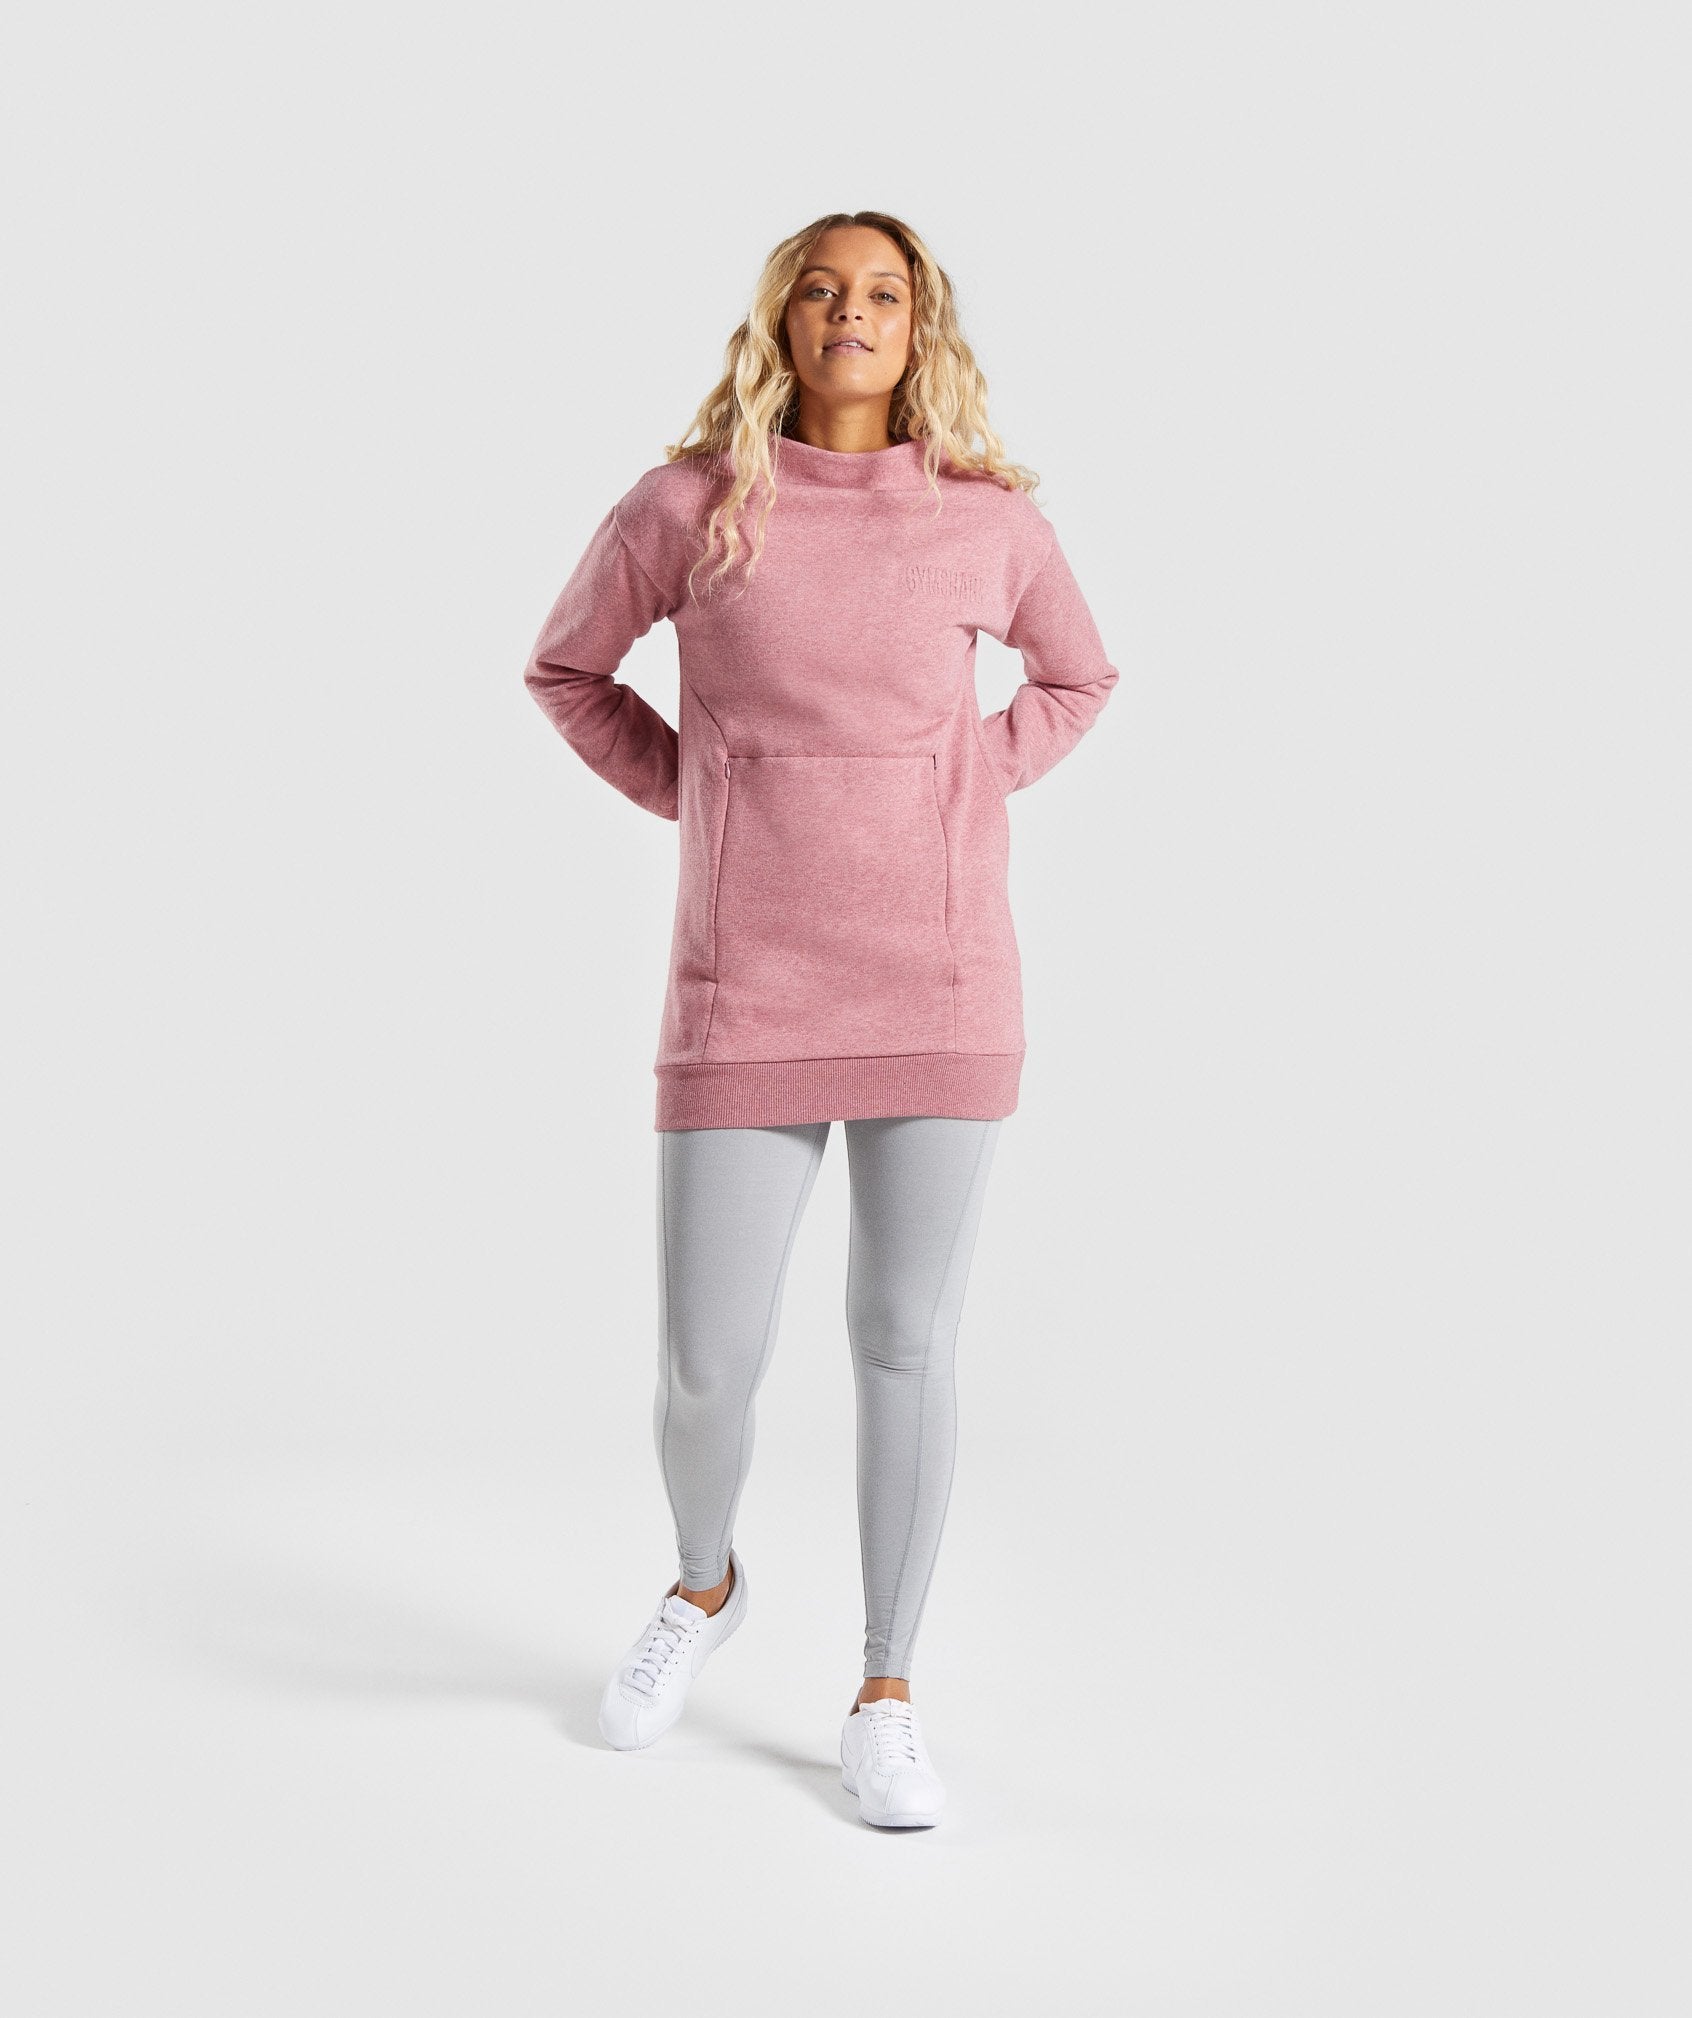 So Soft Sweater in Dusky Pink Marl - view 4